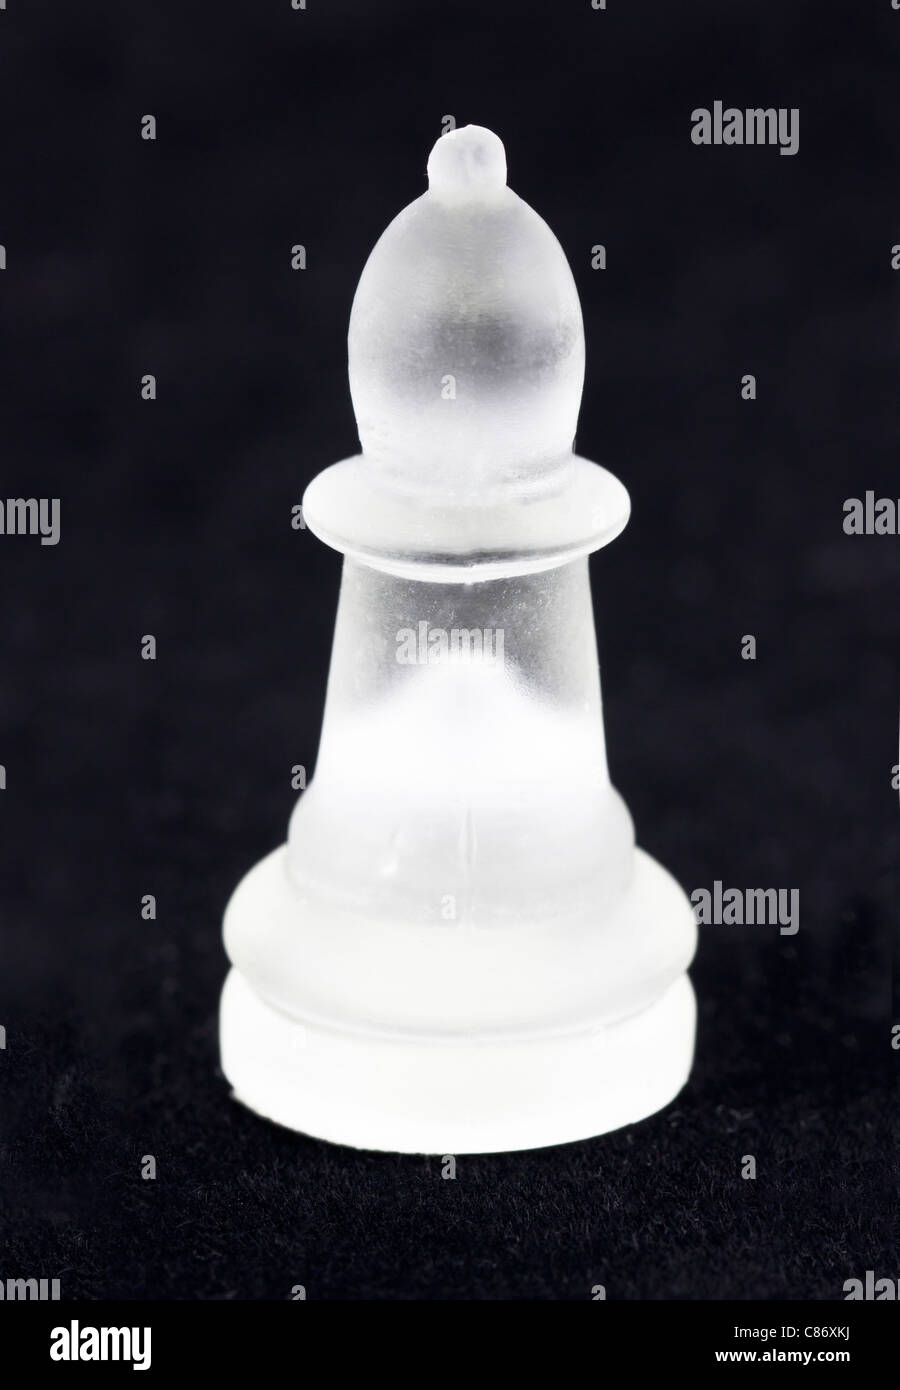 Bishop chess piece made of tinted glass Stock Photo